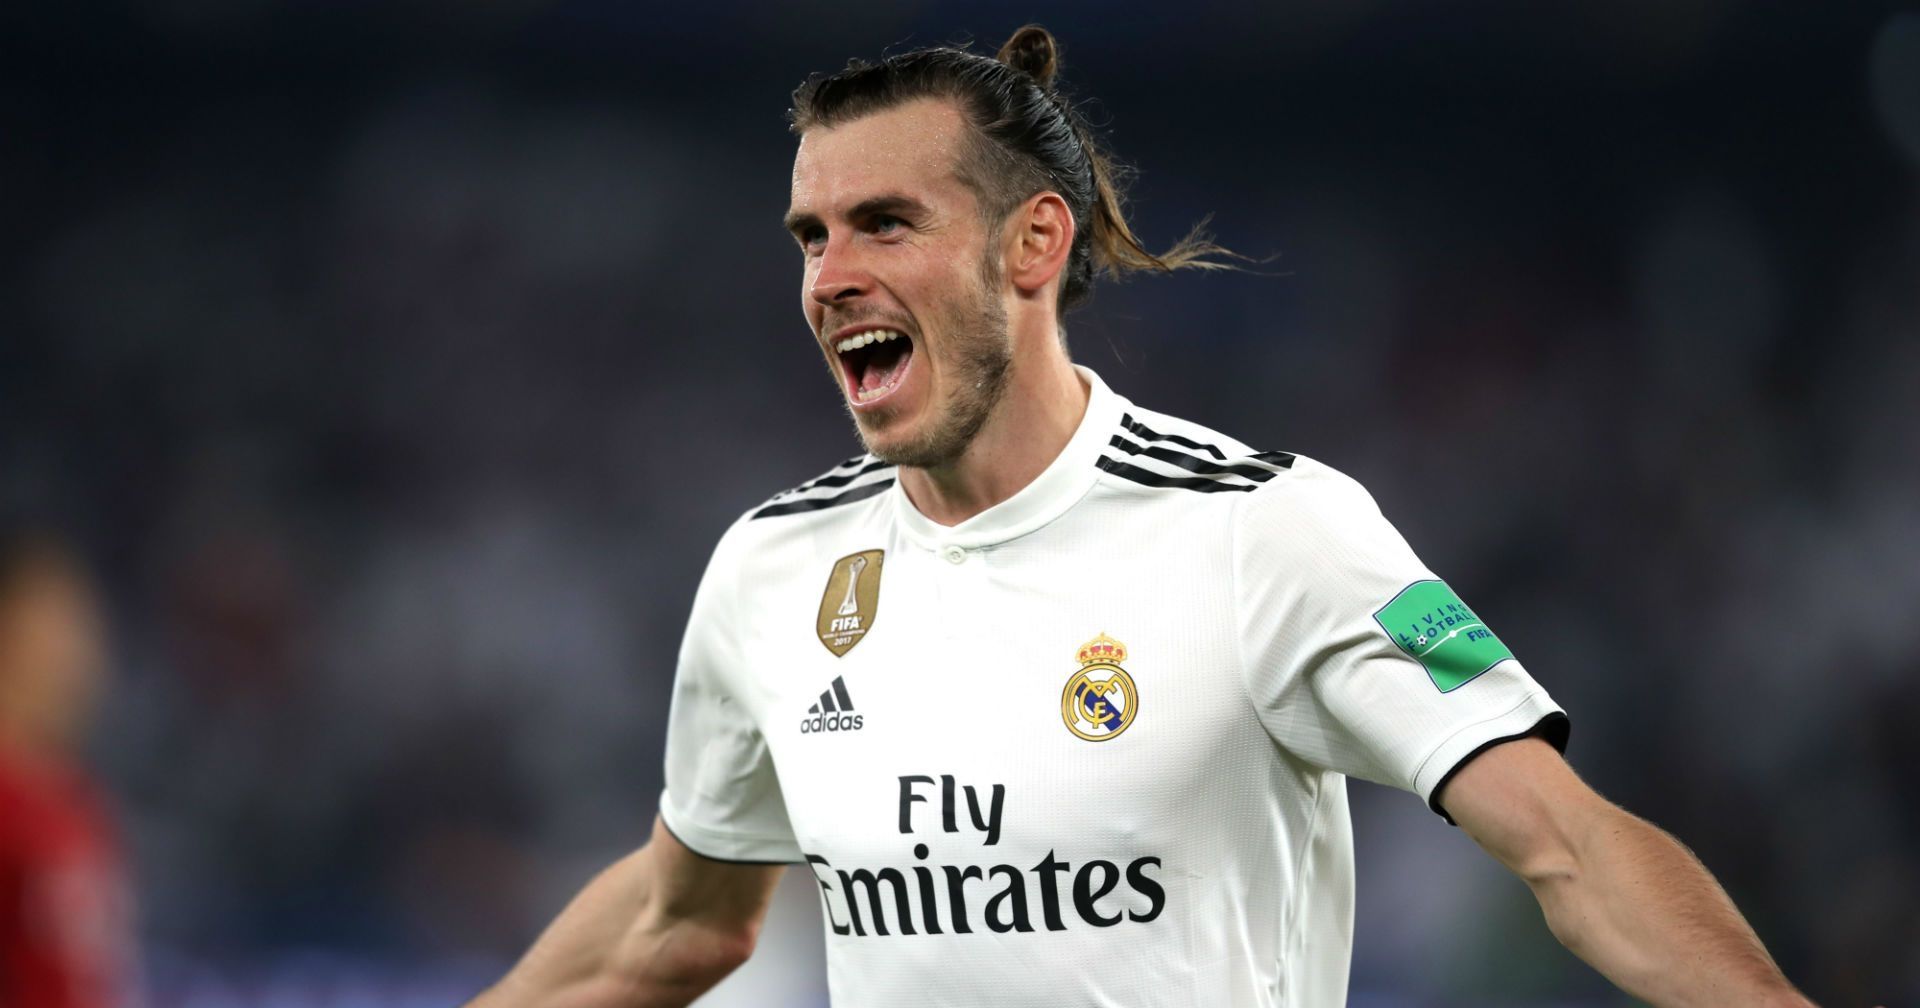 3 Goals In 11 Minutes! Yes, That's What Gareth Bale Did ...